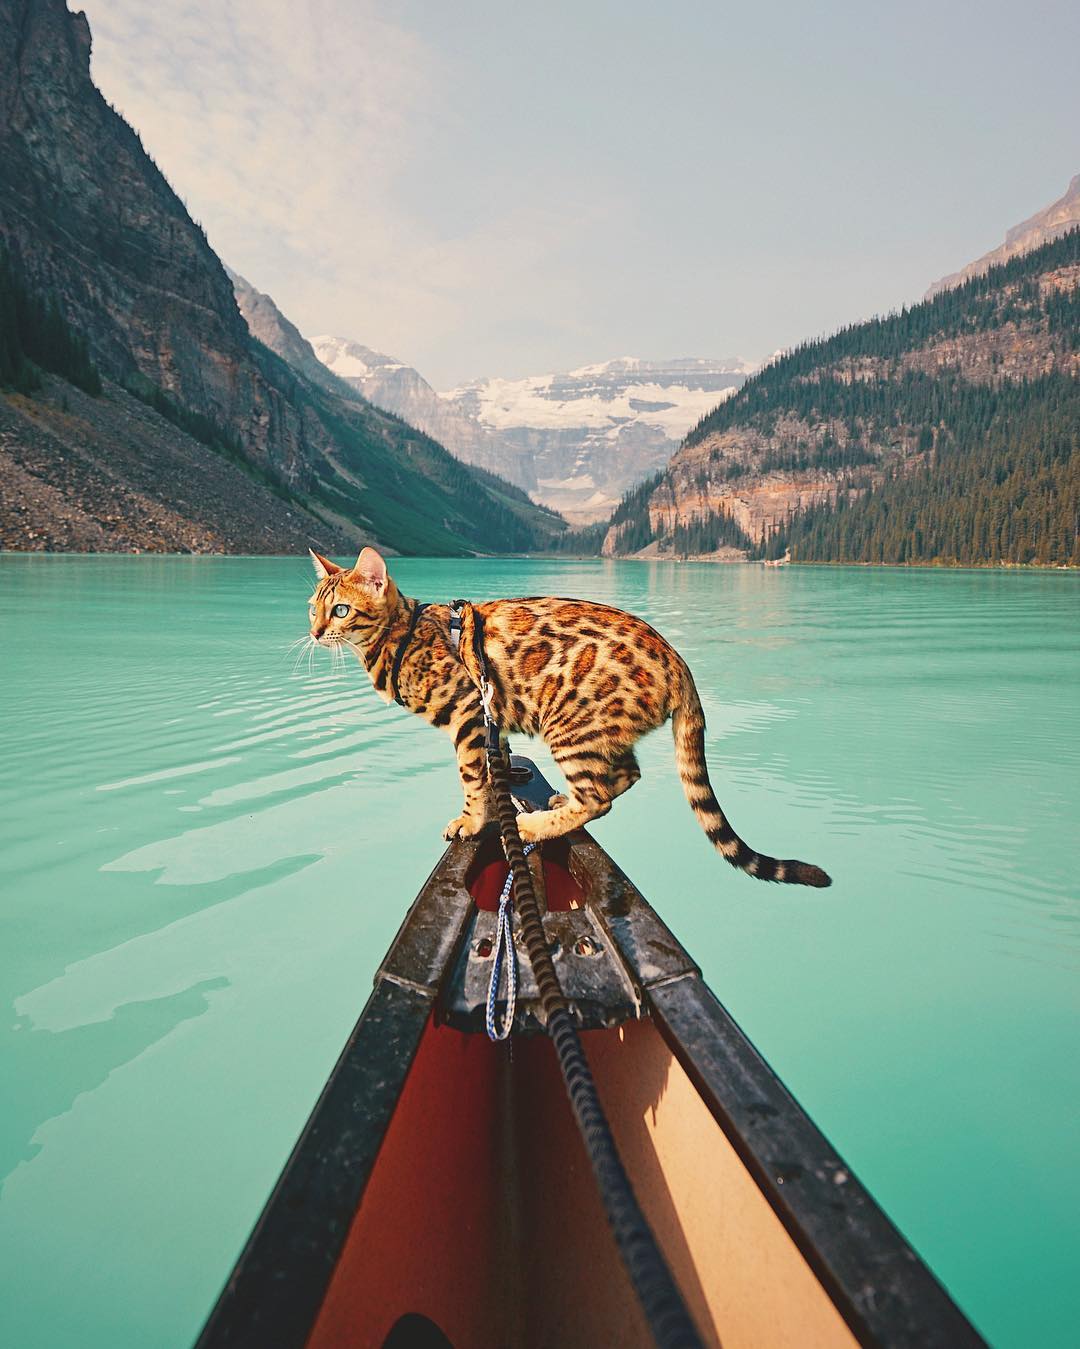 General 1080x1349 cats landscape mountains water trees animals boat